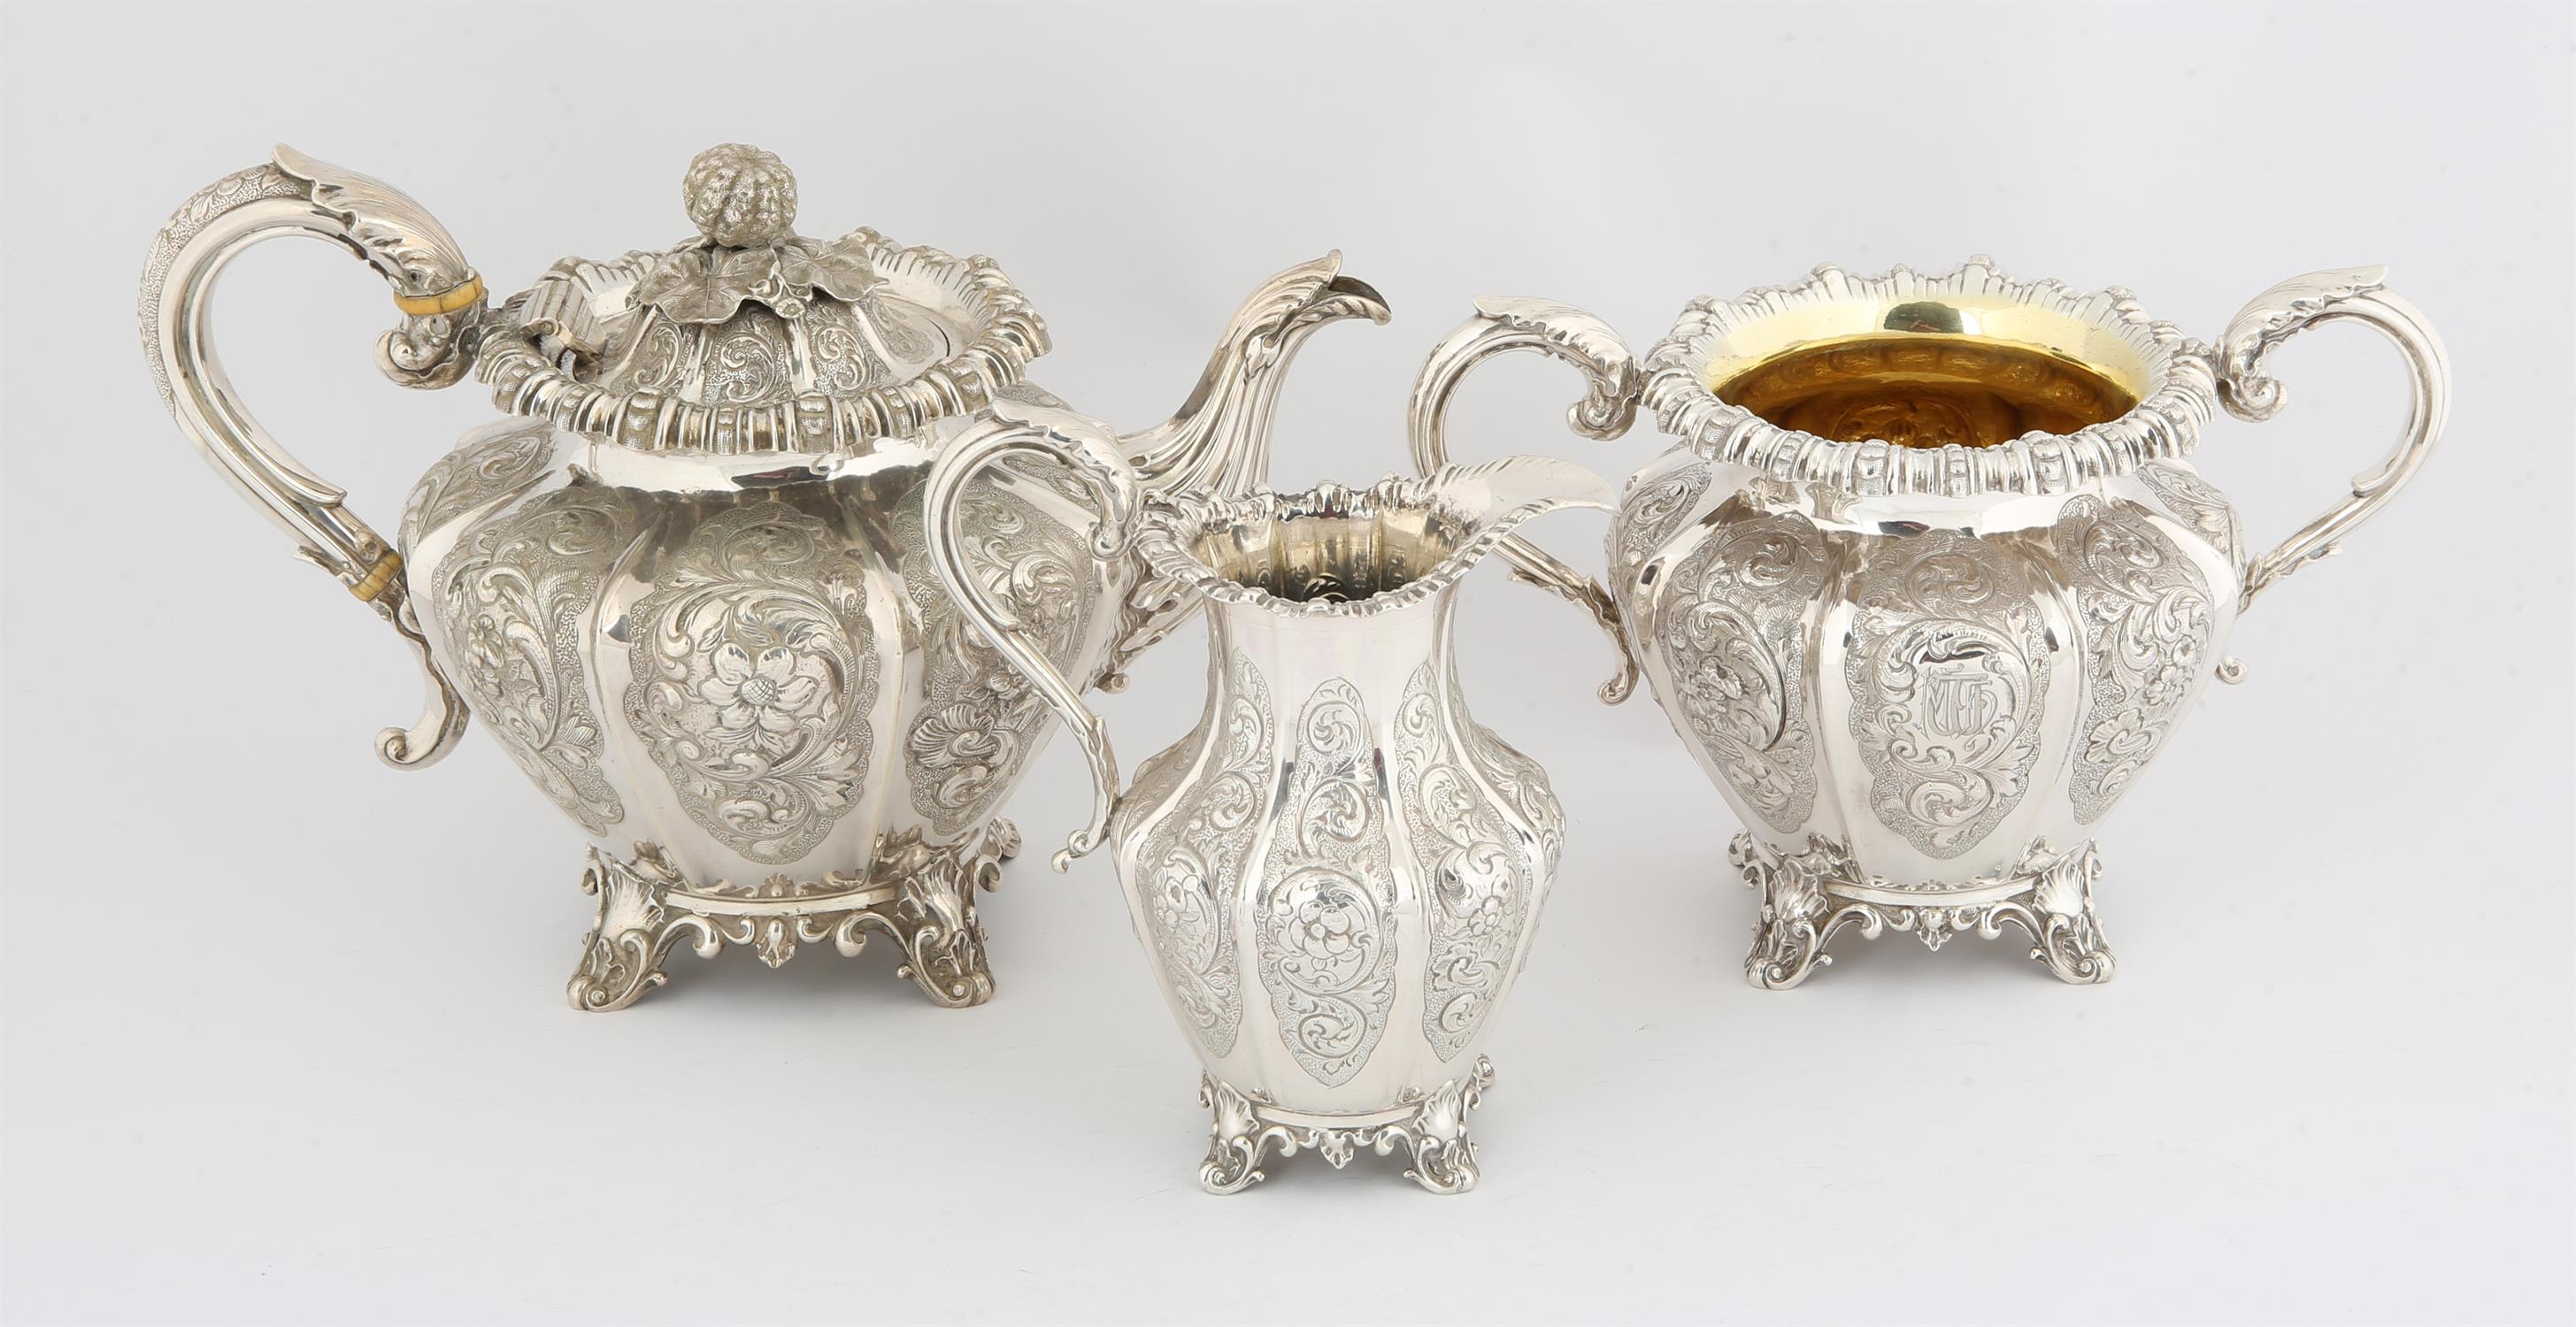 Victorian silver good quality three piece tea service decorated with embossed panels of flowers and - Image 4 of 6